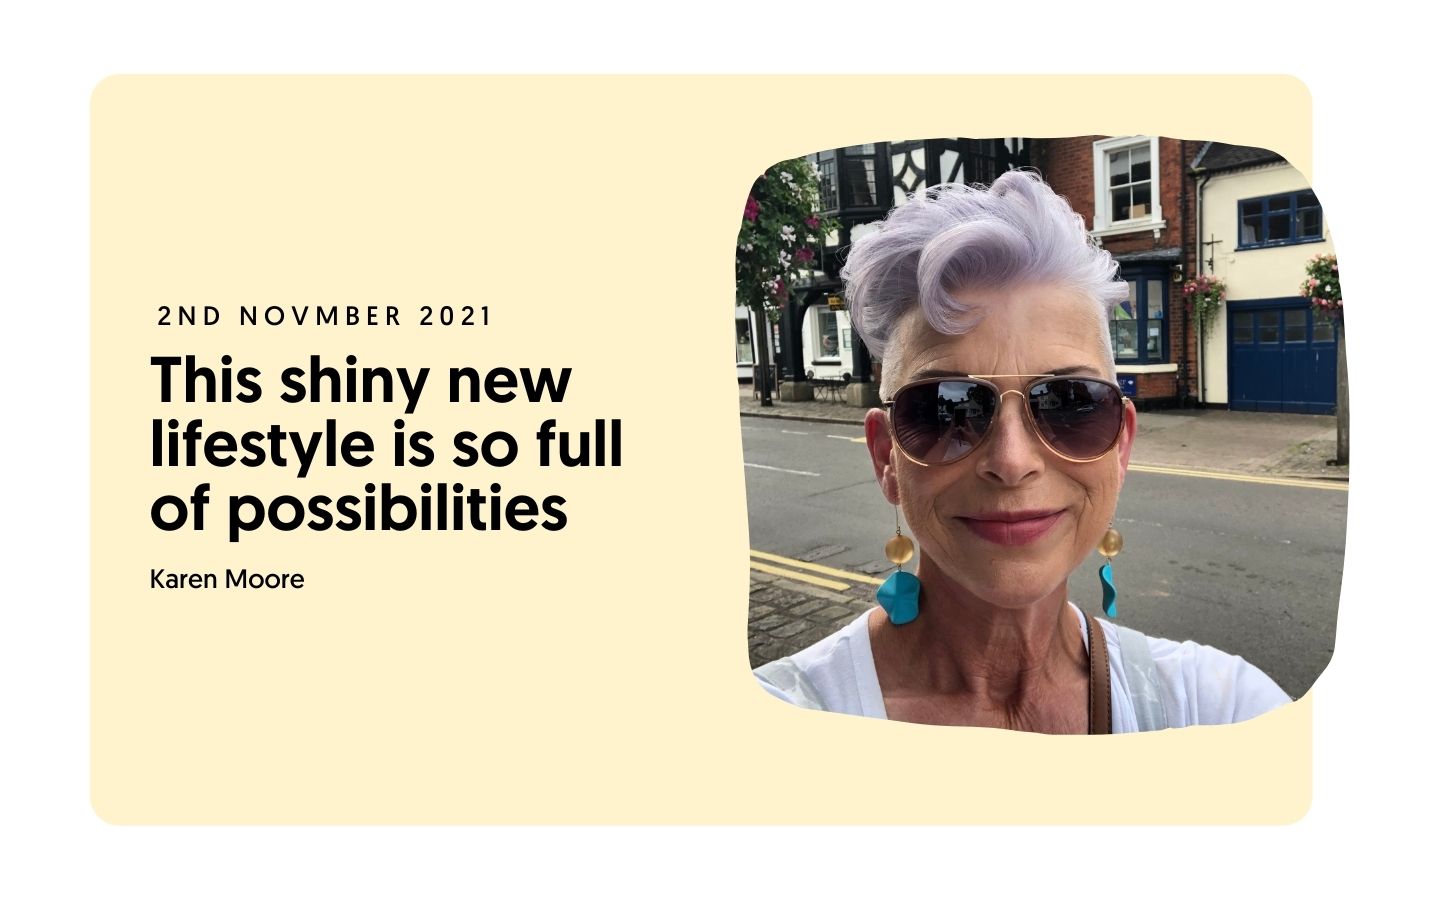 This shiny new lifestyle is so full of possibilities – Karen Moore